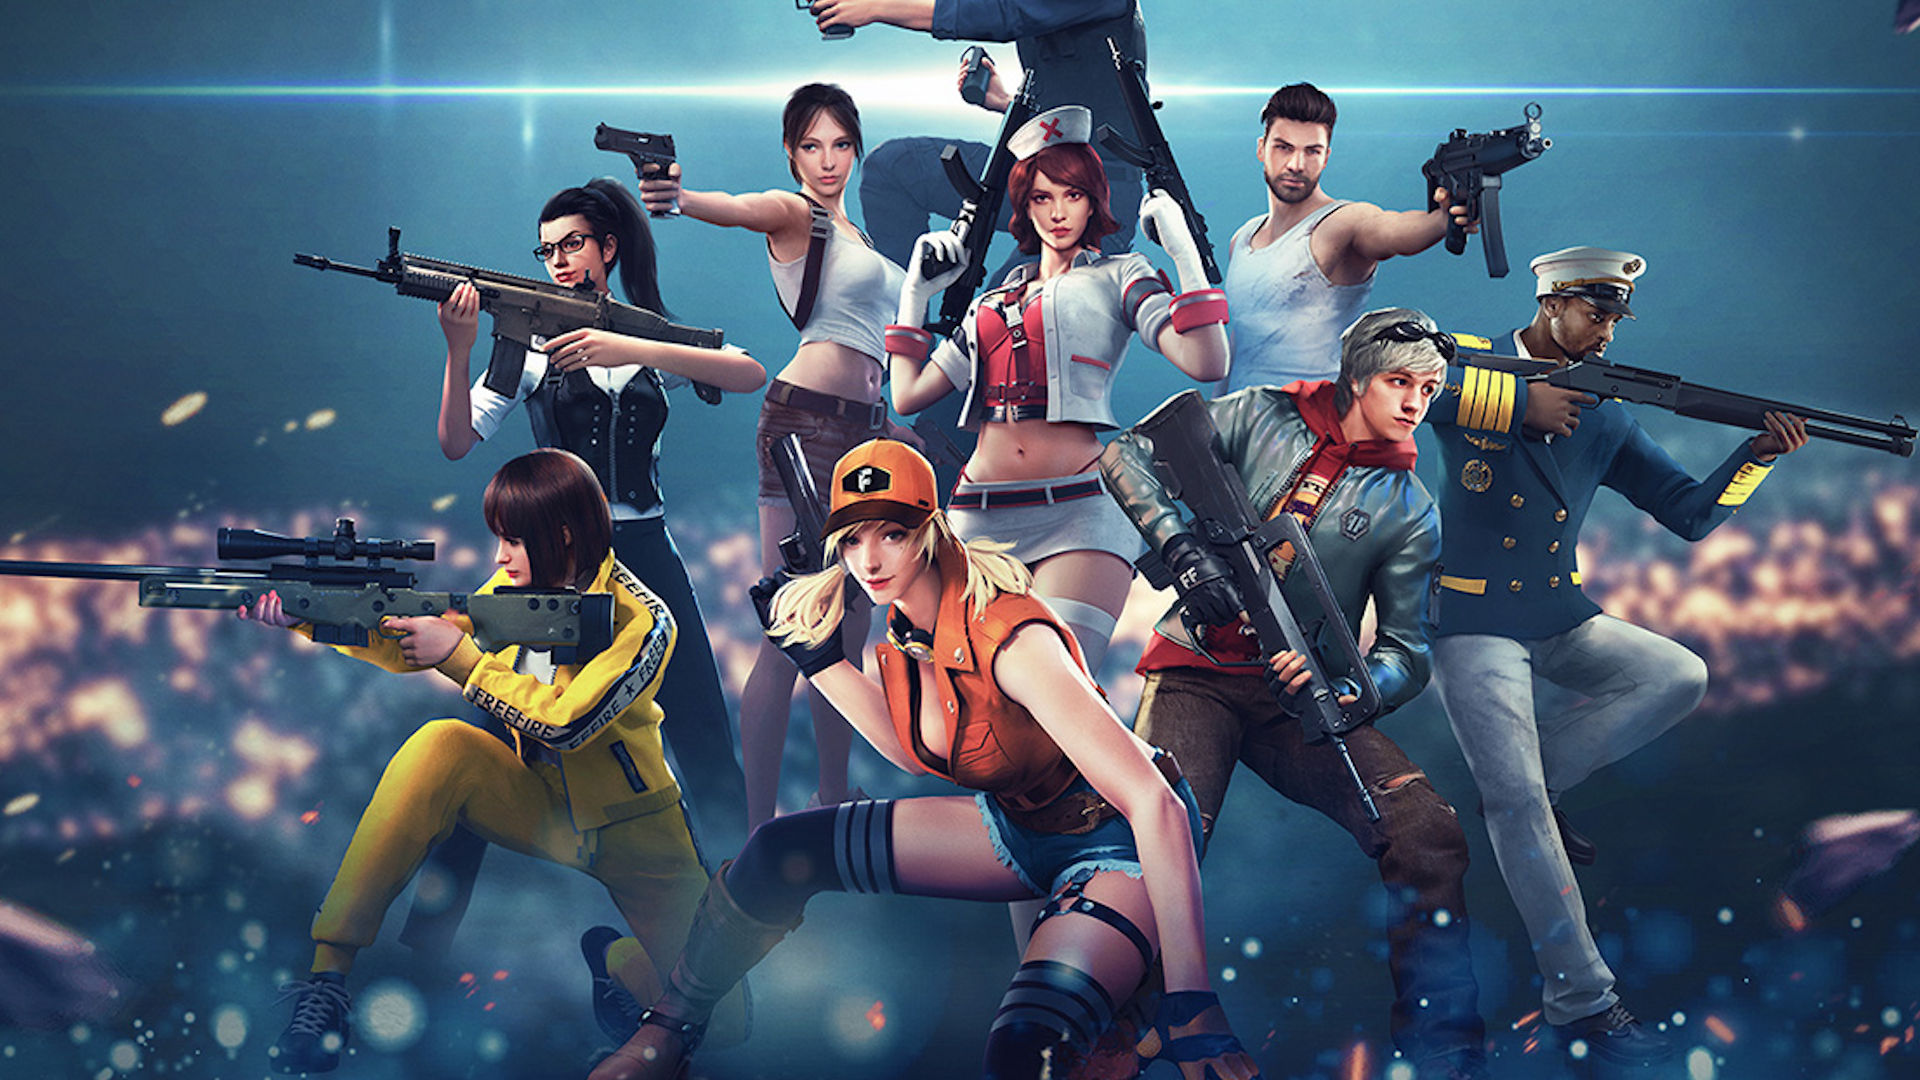 Best iOS games: Garena Free Fire. Image shows a large group of characters with guns.